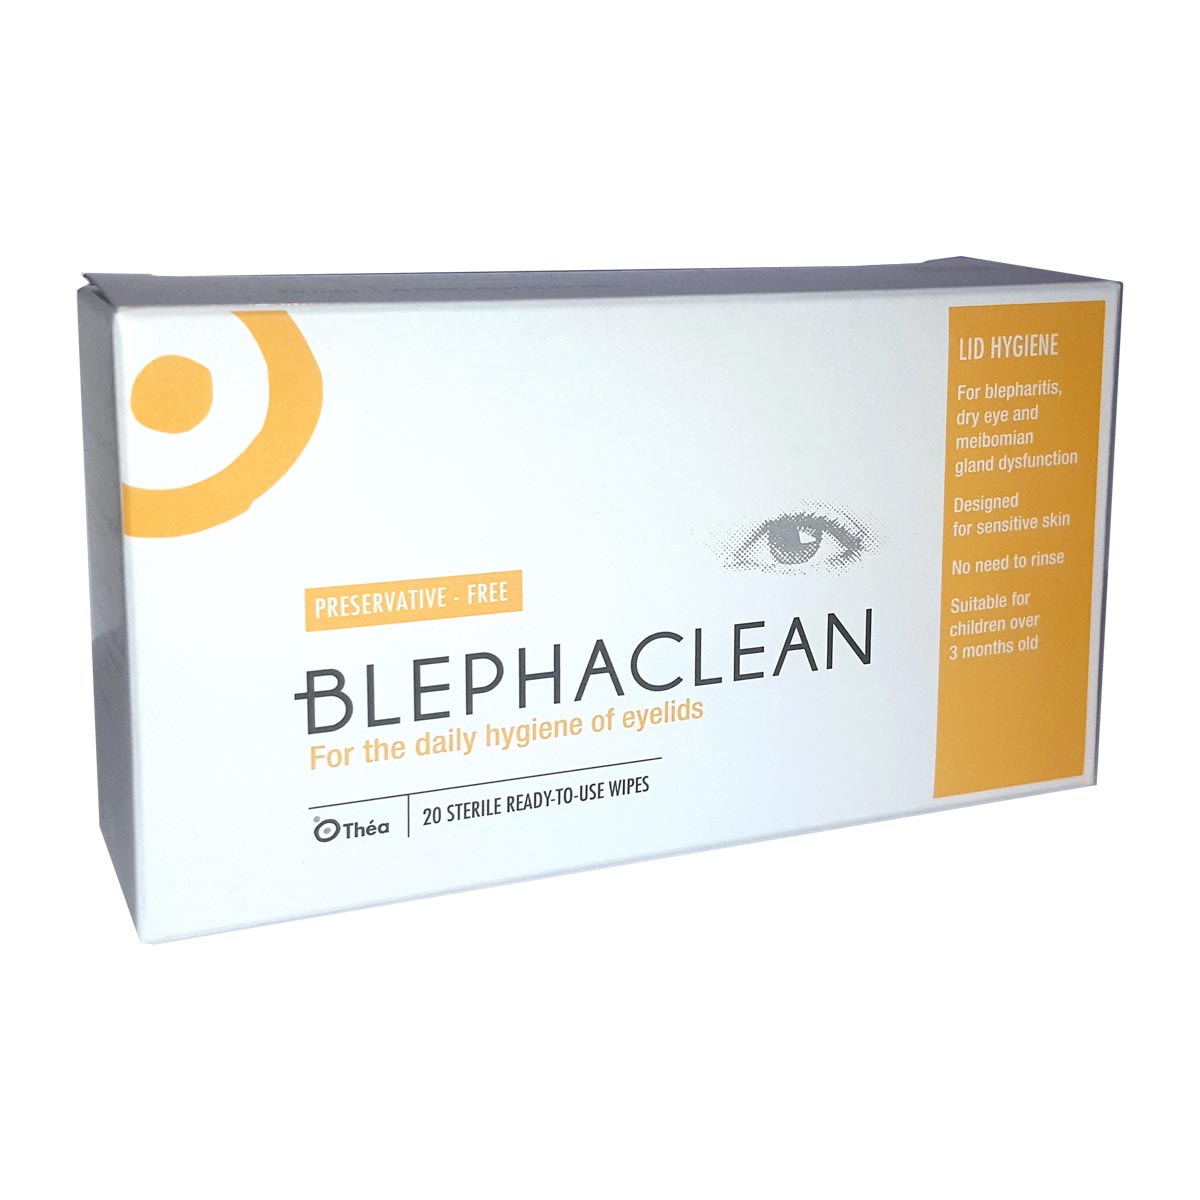 Image of Blephaclean 20 sterile pads